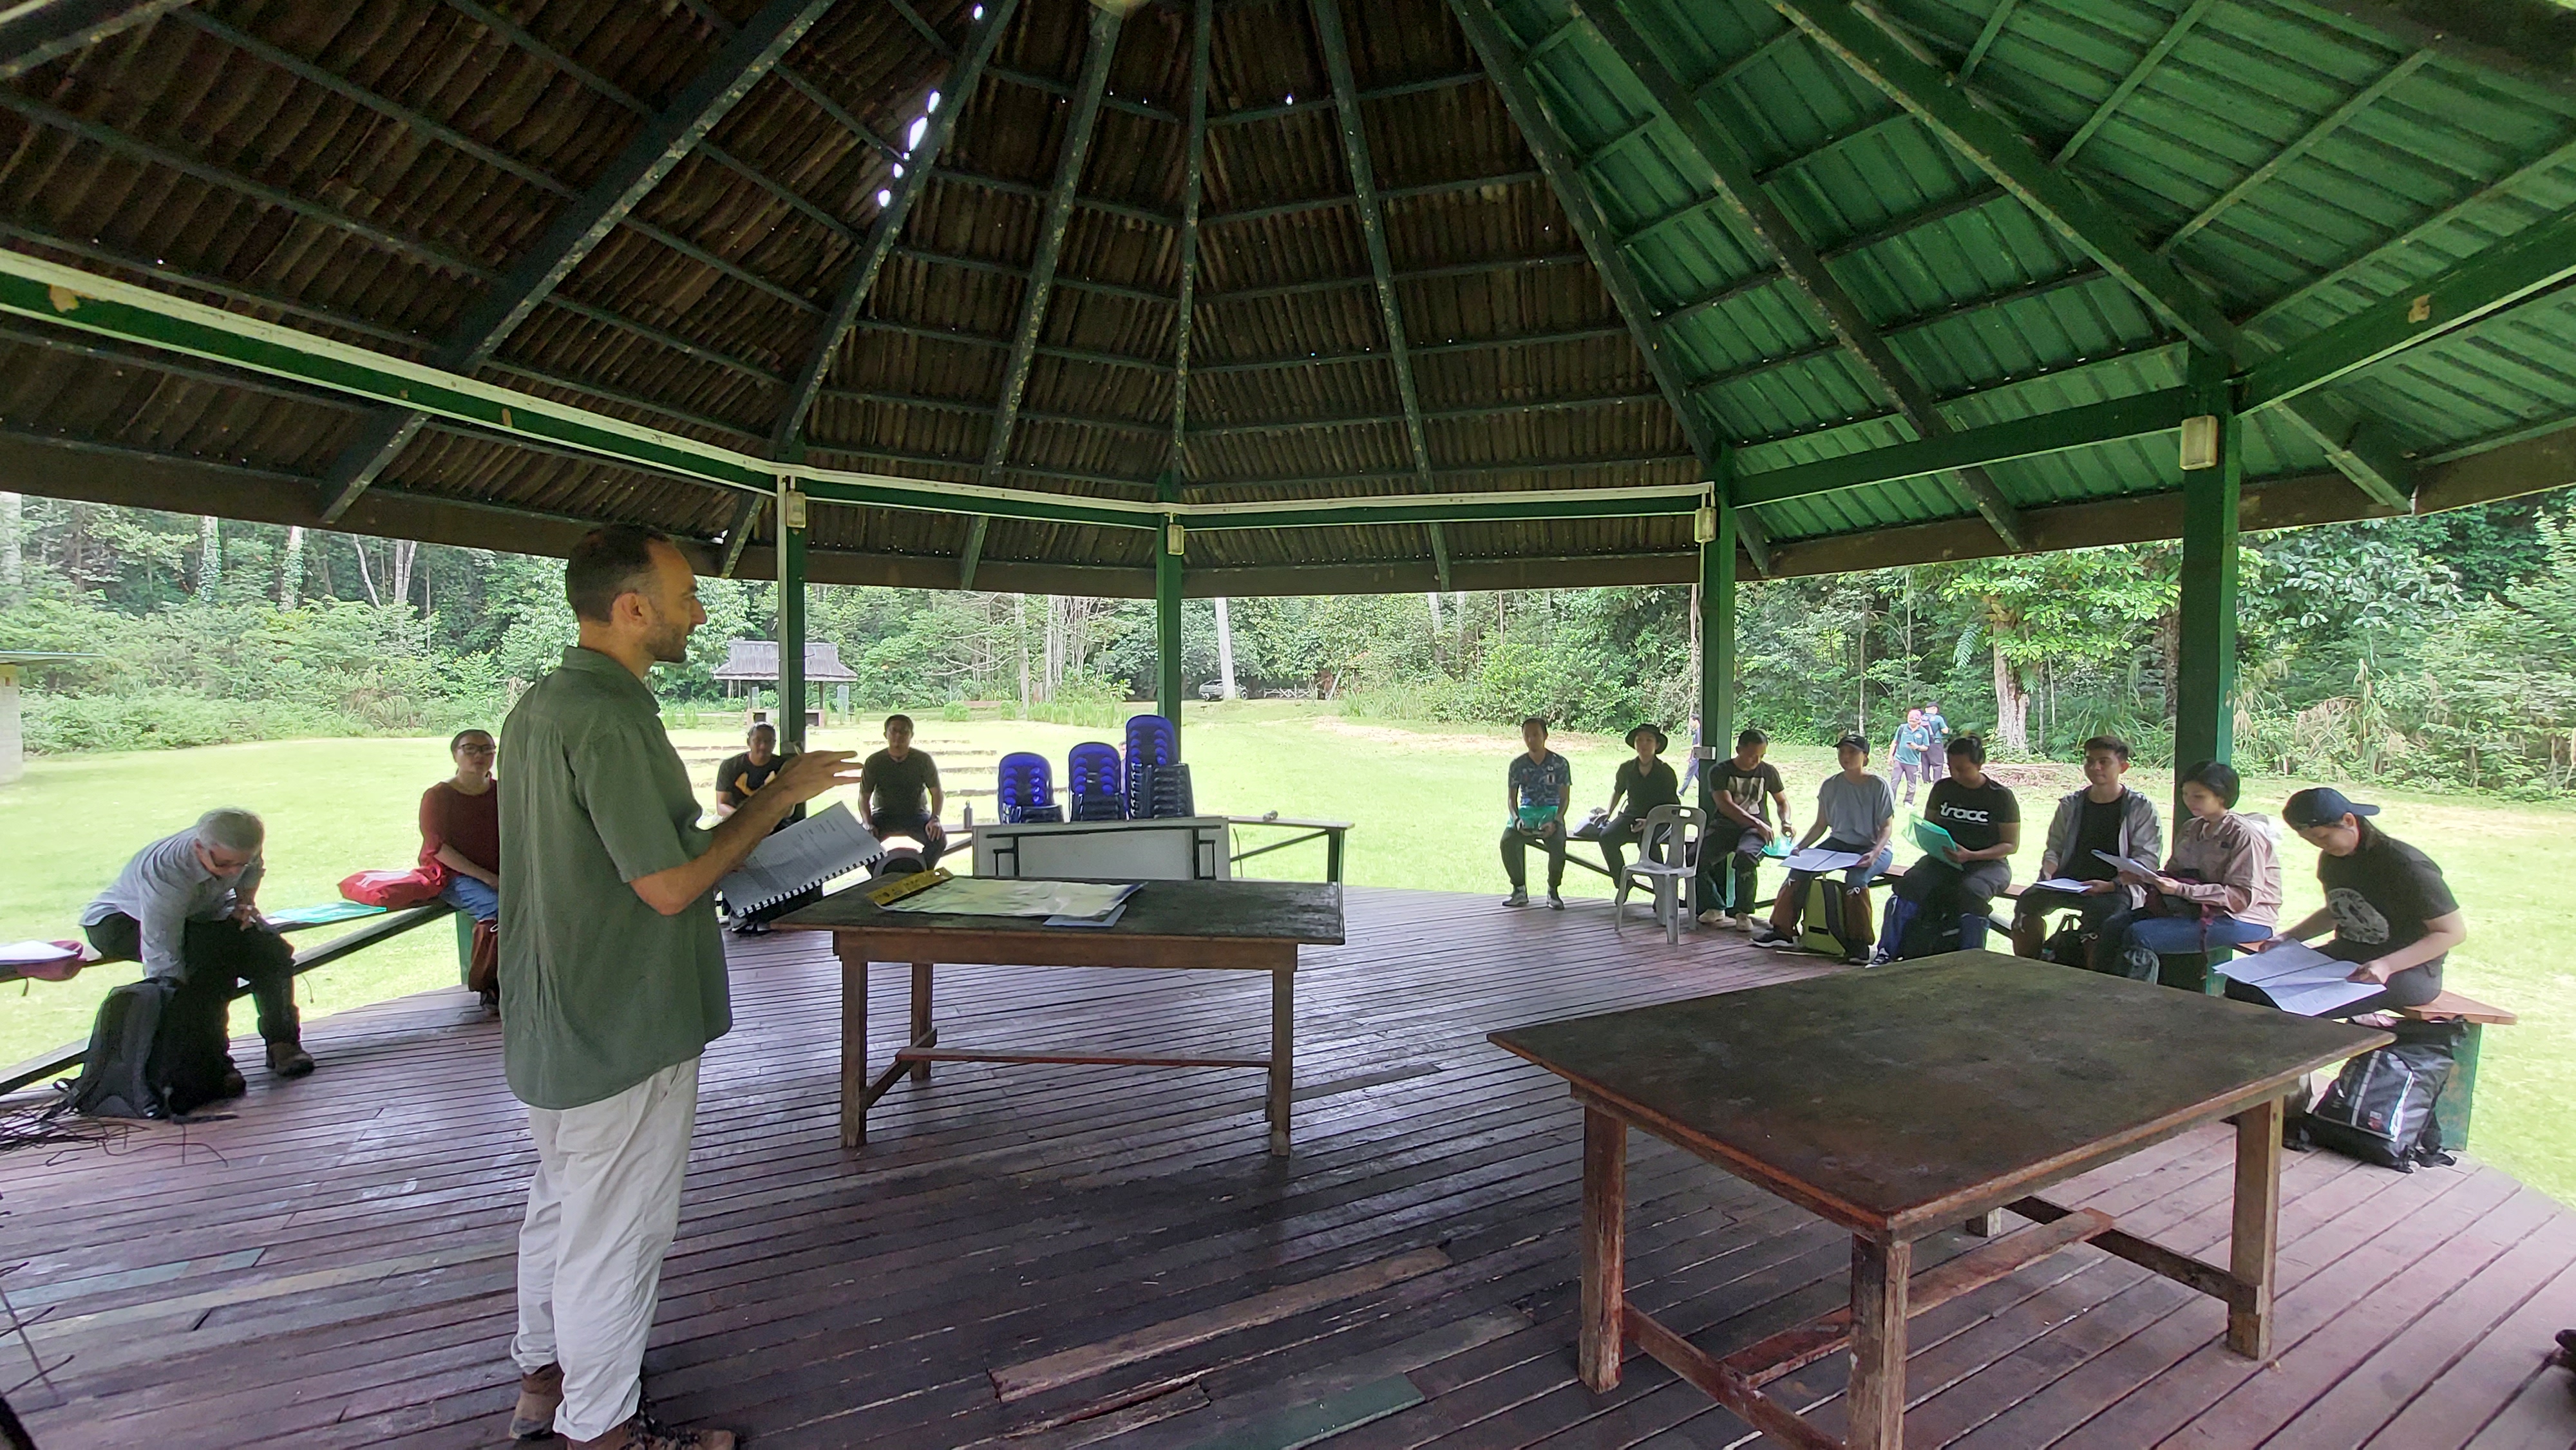 Outdoor classroom session